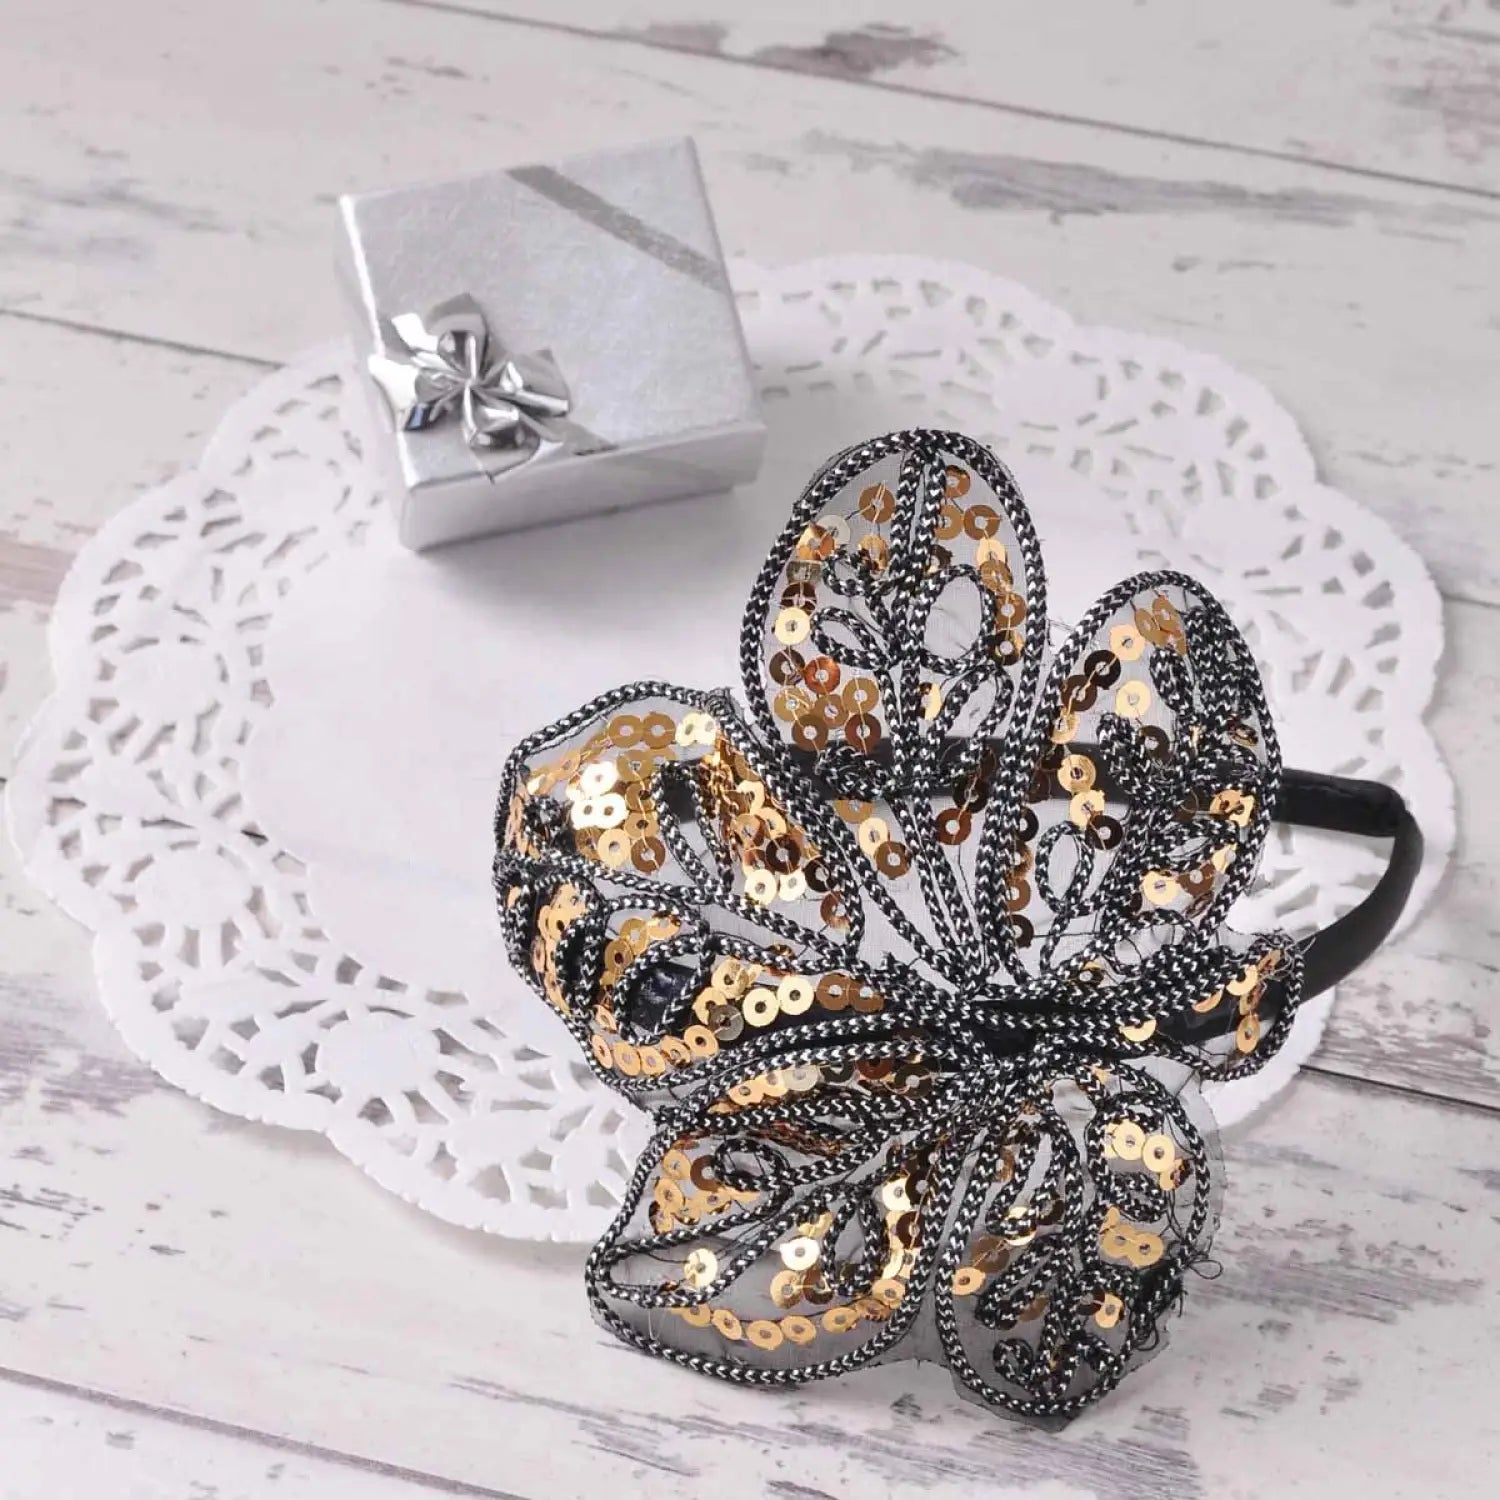 Black and gold flower hair clip on a white dog, part of Elegant Leaf Alice Headband with Spangle & Sequin Detailing product.